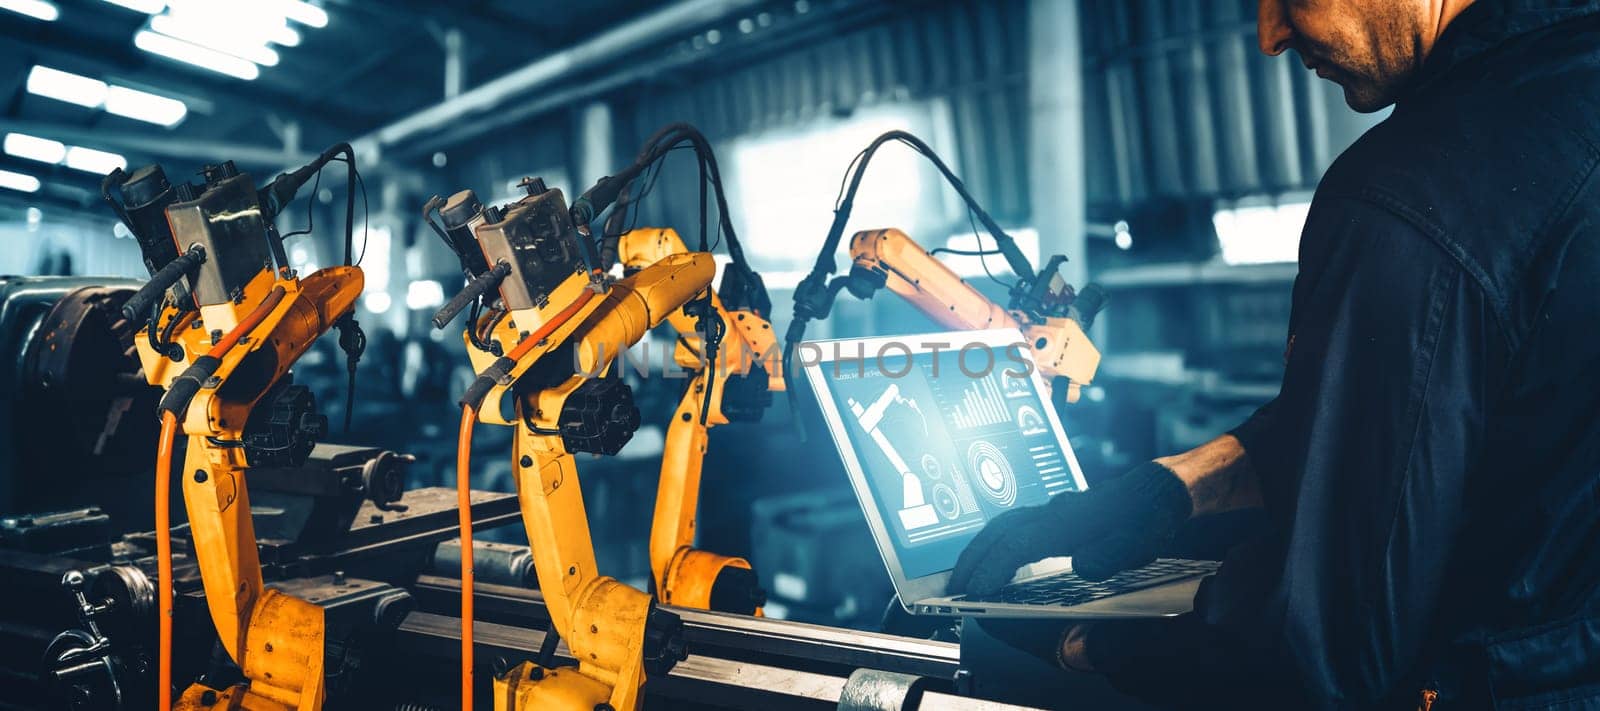 XAI Smart industry robot arms for digital factory production technology showing automation manufacturing process of the Industry 4.0 or 4th industrial revolution and IOT software to control operation.